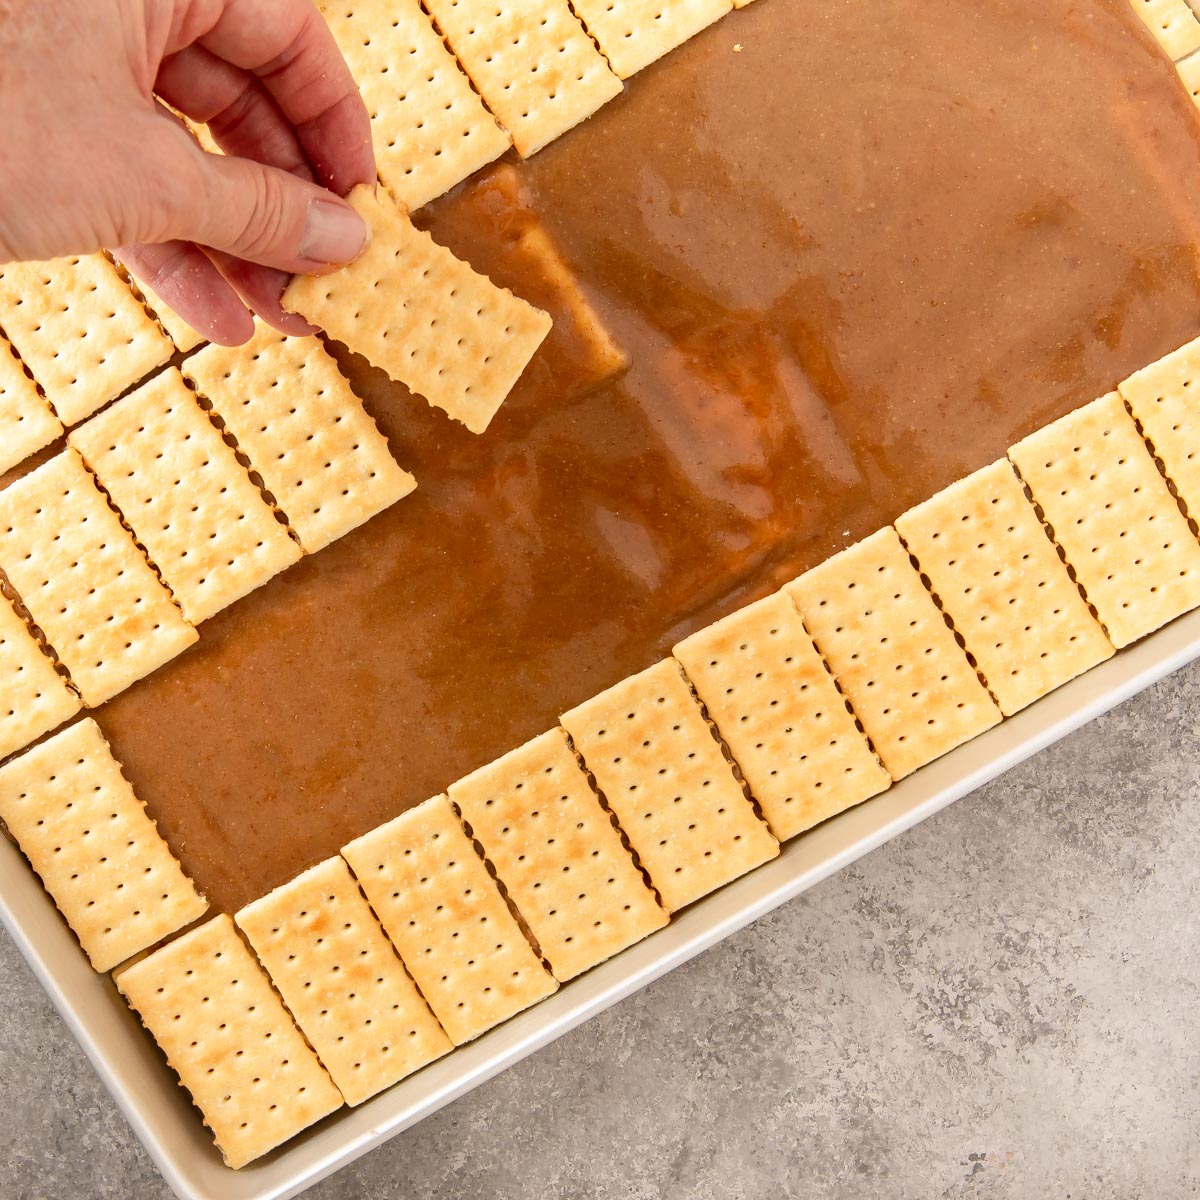 placing a second row of crackers on top of toffee mixture